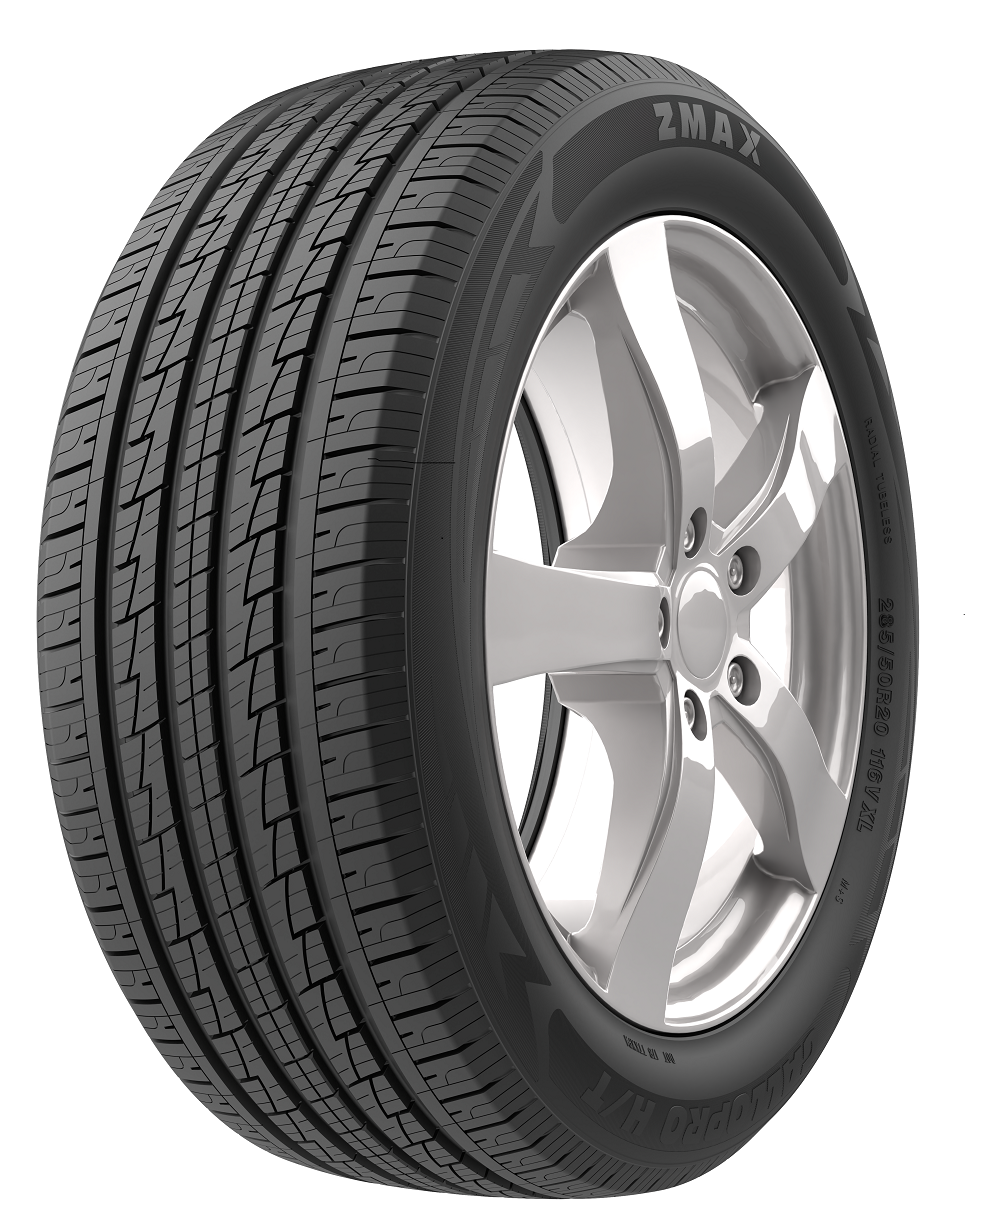 265/70 R16 112T ZMAX GALLOPRO H/T HT